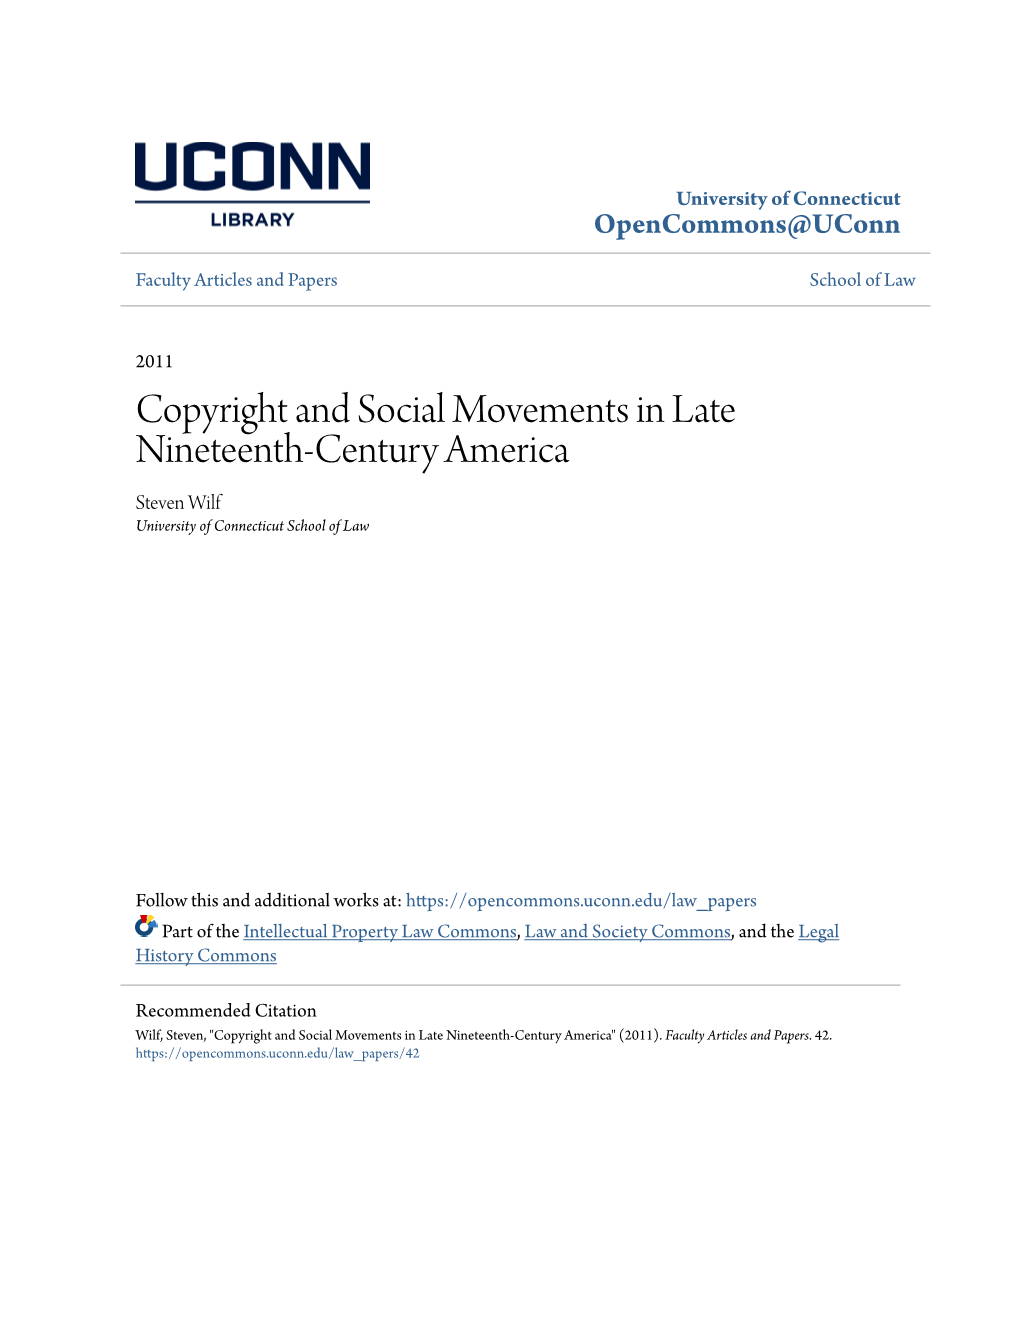 Copyright and Social Movements in Late Nineteenth-Century America Steven Wilf University of Connecticut School of Law